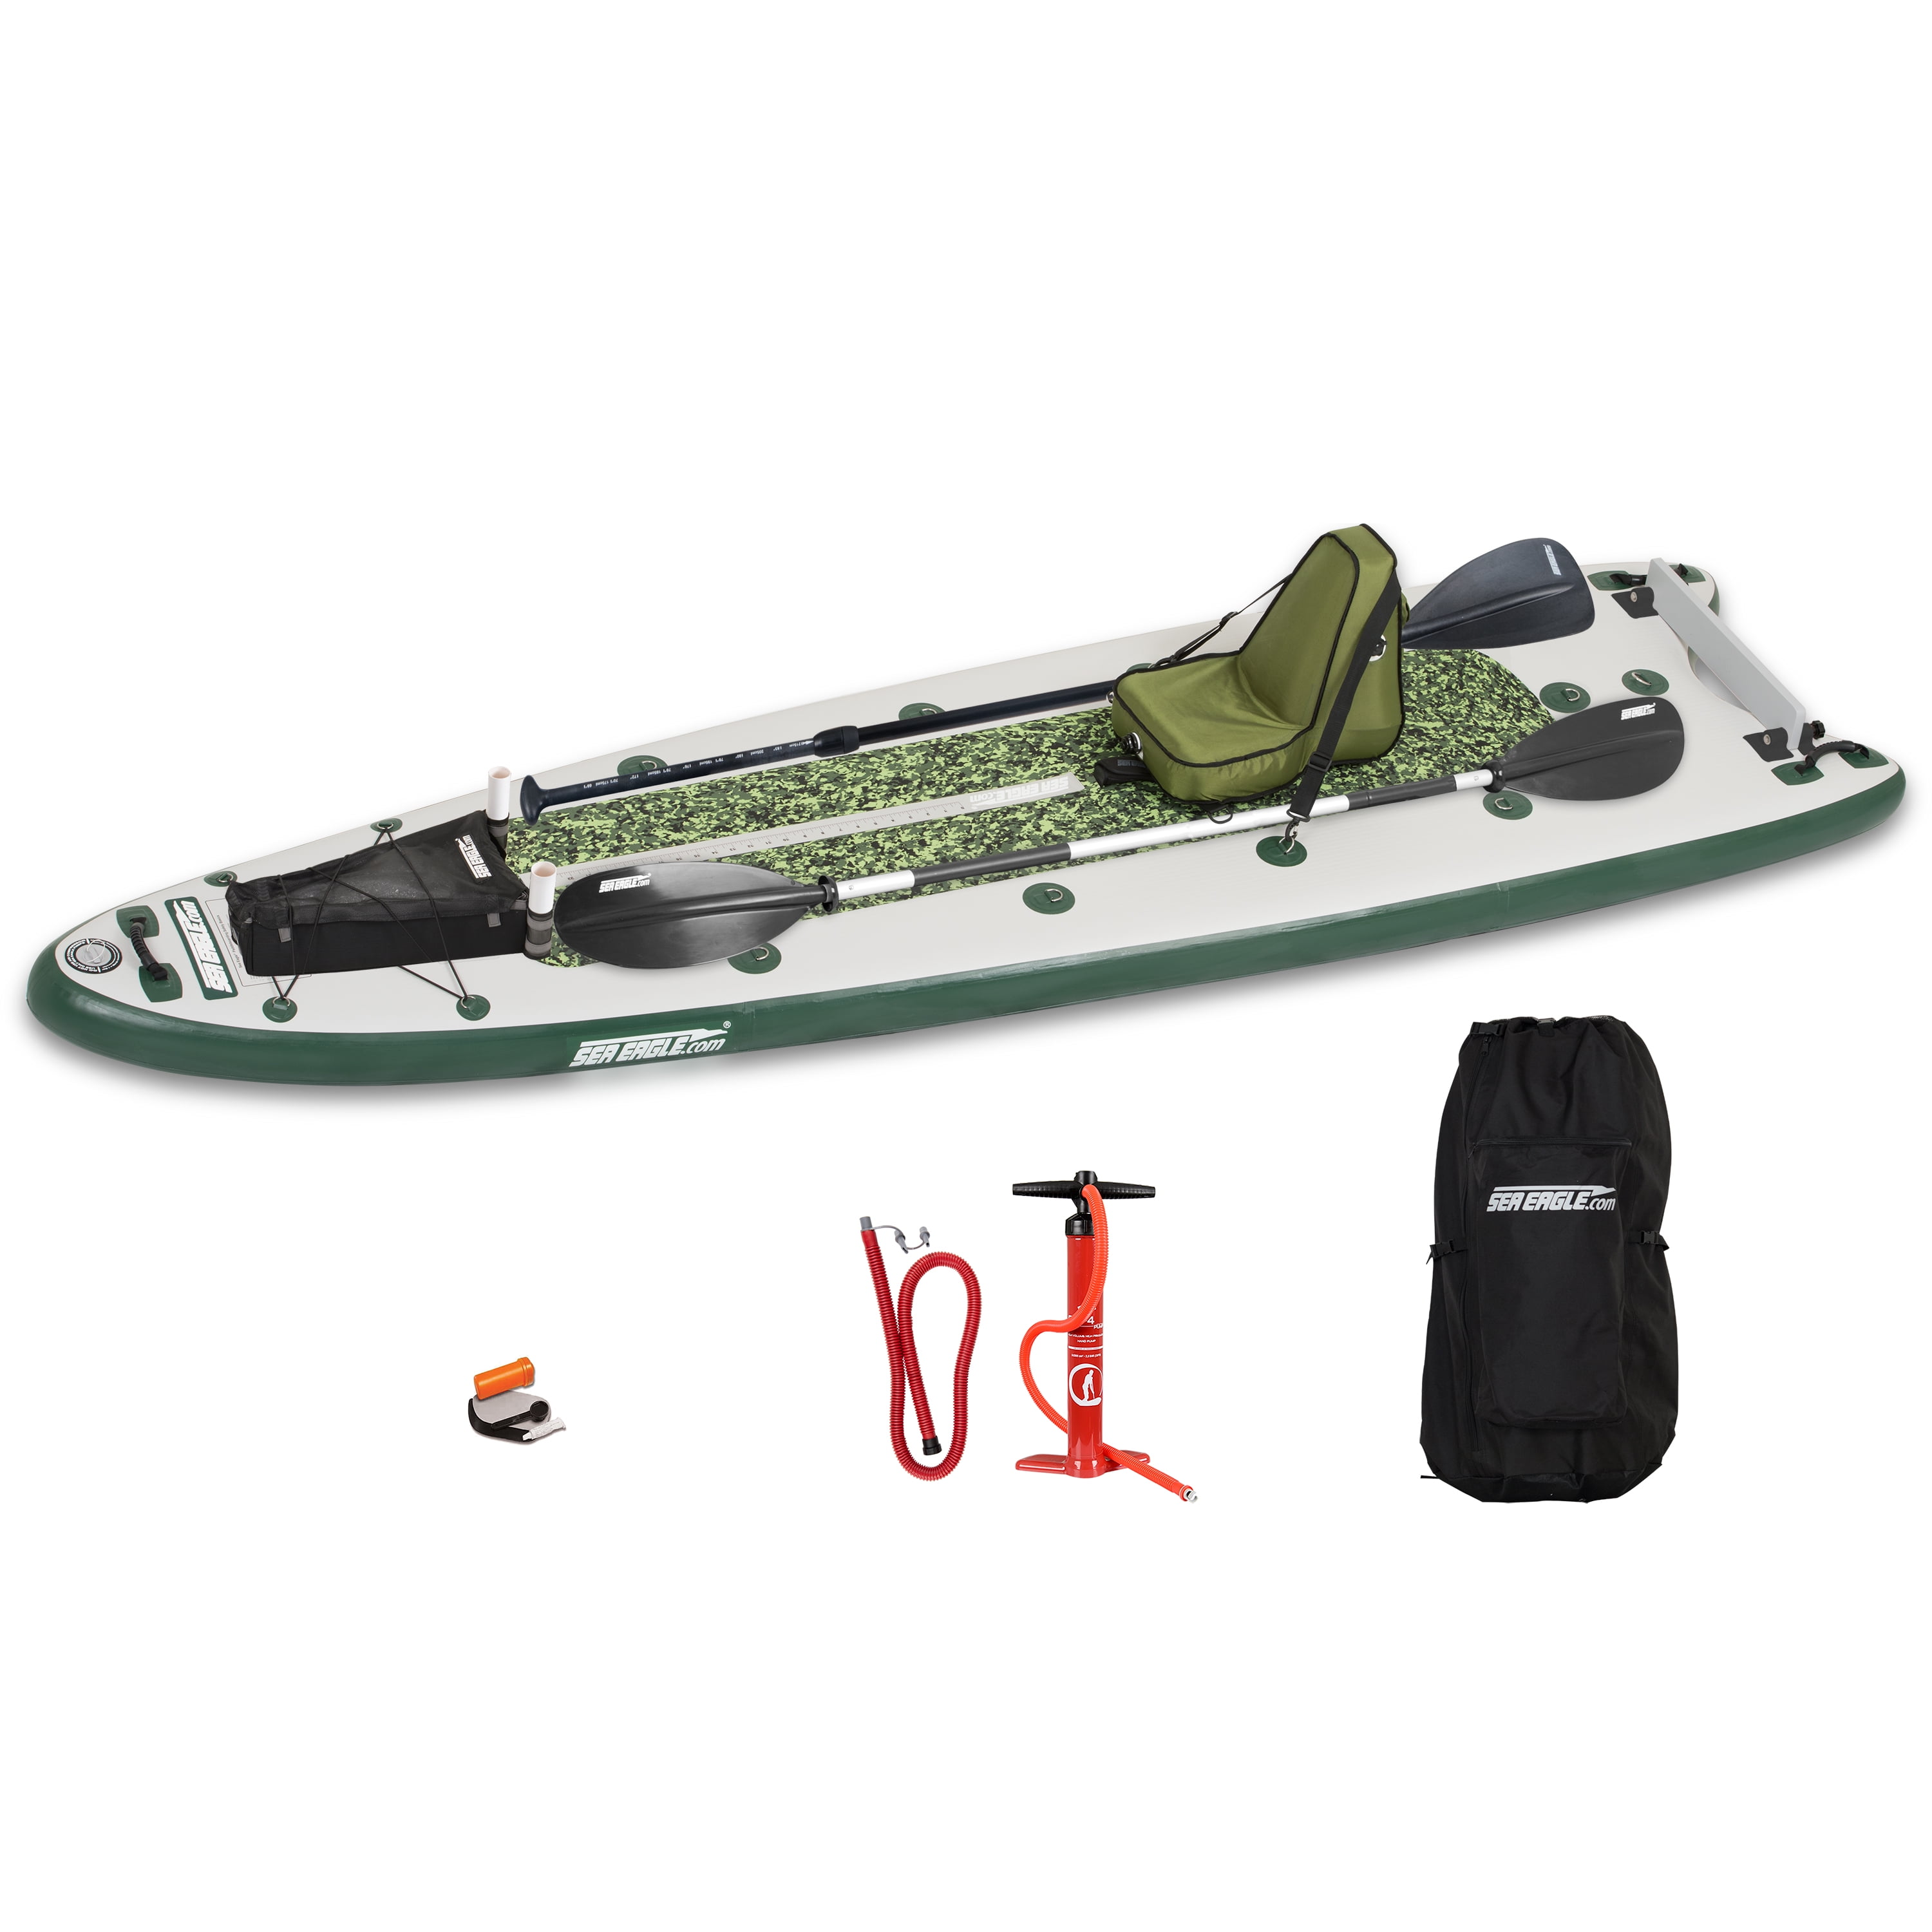 Sea Eagle FS126 12'6” Inflatable FishSUP Fishing Stand-Up Paddleboard w/ Paddle(s), Storage Box, Pump, Removable Transom, Backpack/Optional Seat -  Sit, Stand, Fish, Motor, or Troll- Start Up Package 